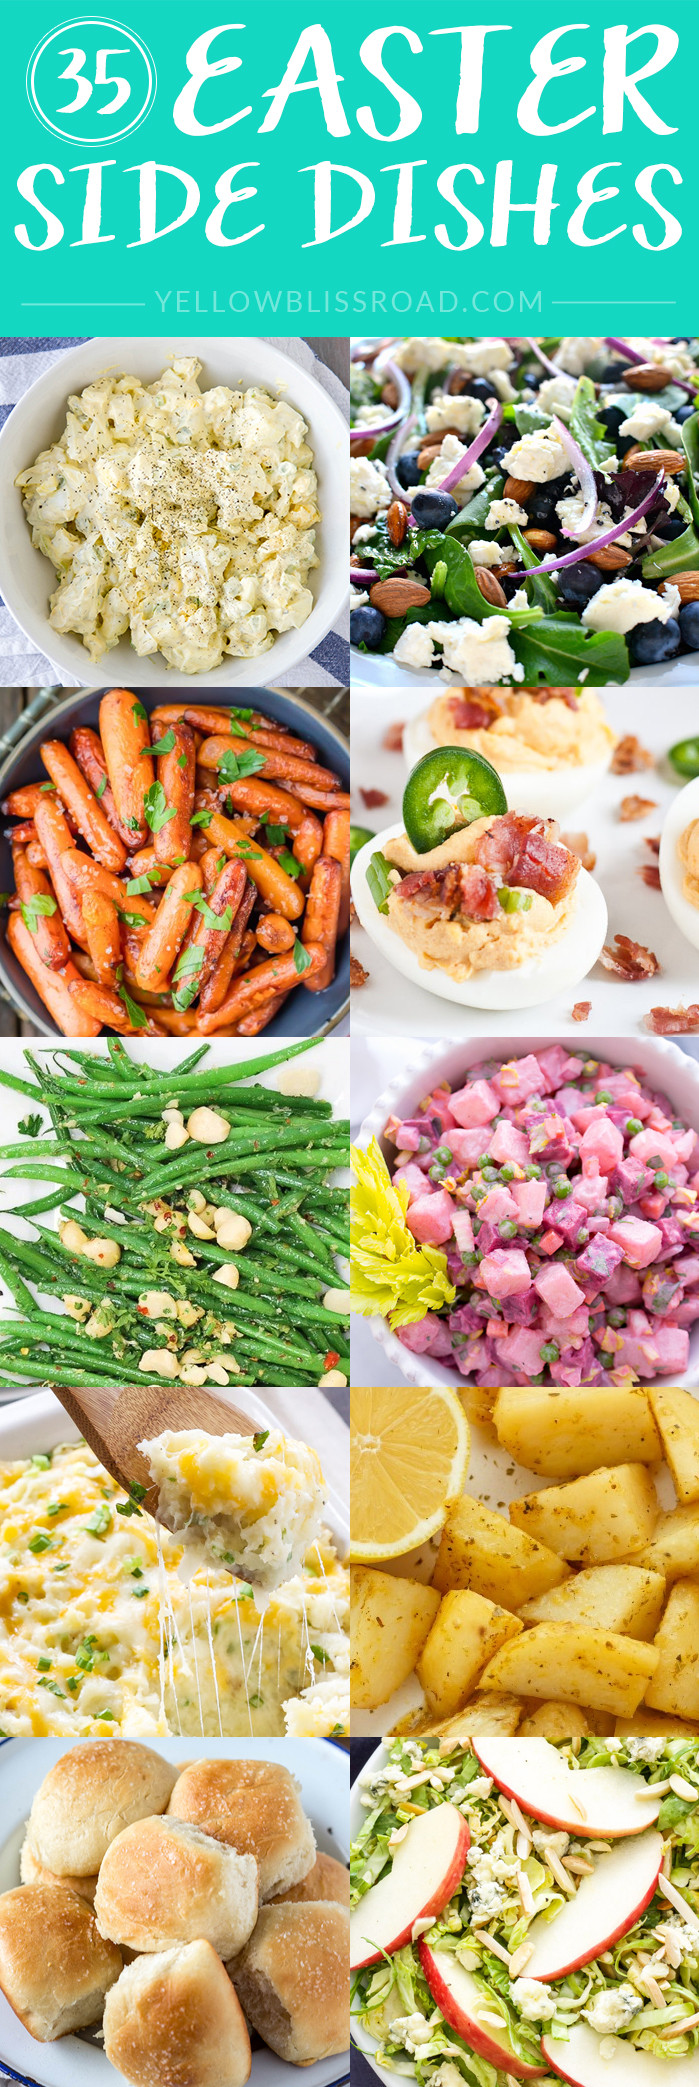 Easter Side Dishes
 Easter Side Dishes More than 50 of the Best Sides for